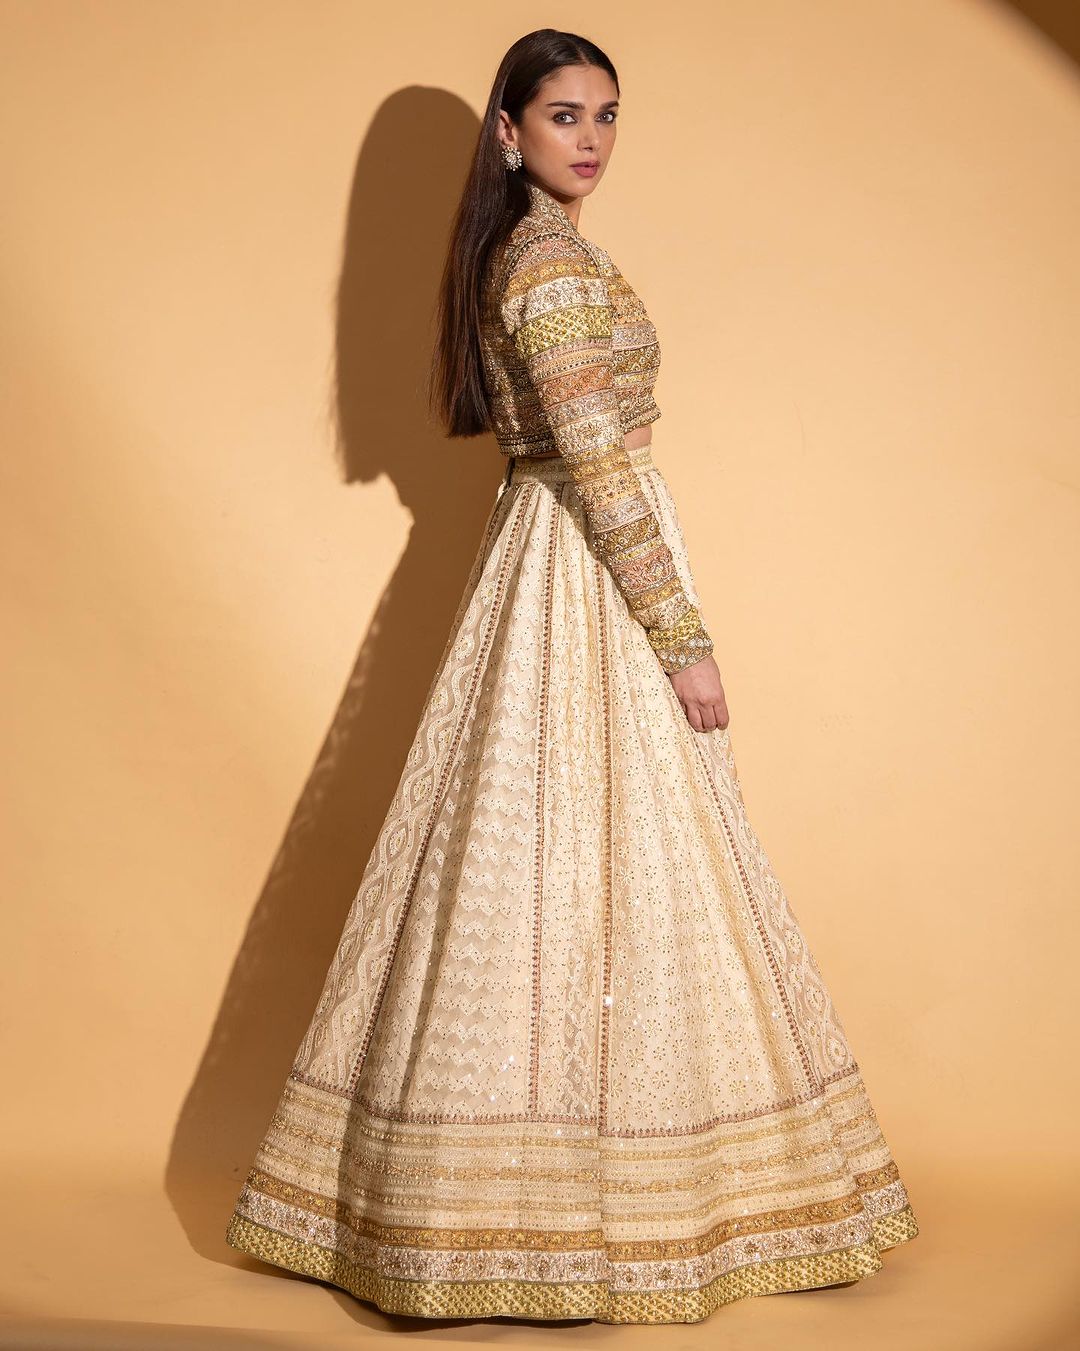 The actress graced the runway in an ivory lehenga, adorned with beautiful Kashmiri embroidery that matched the base color. 